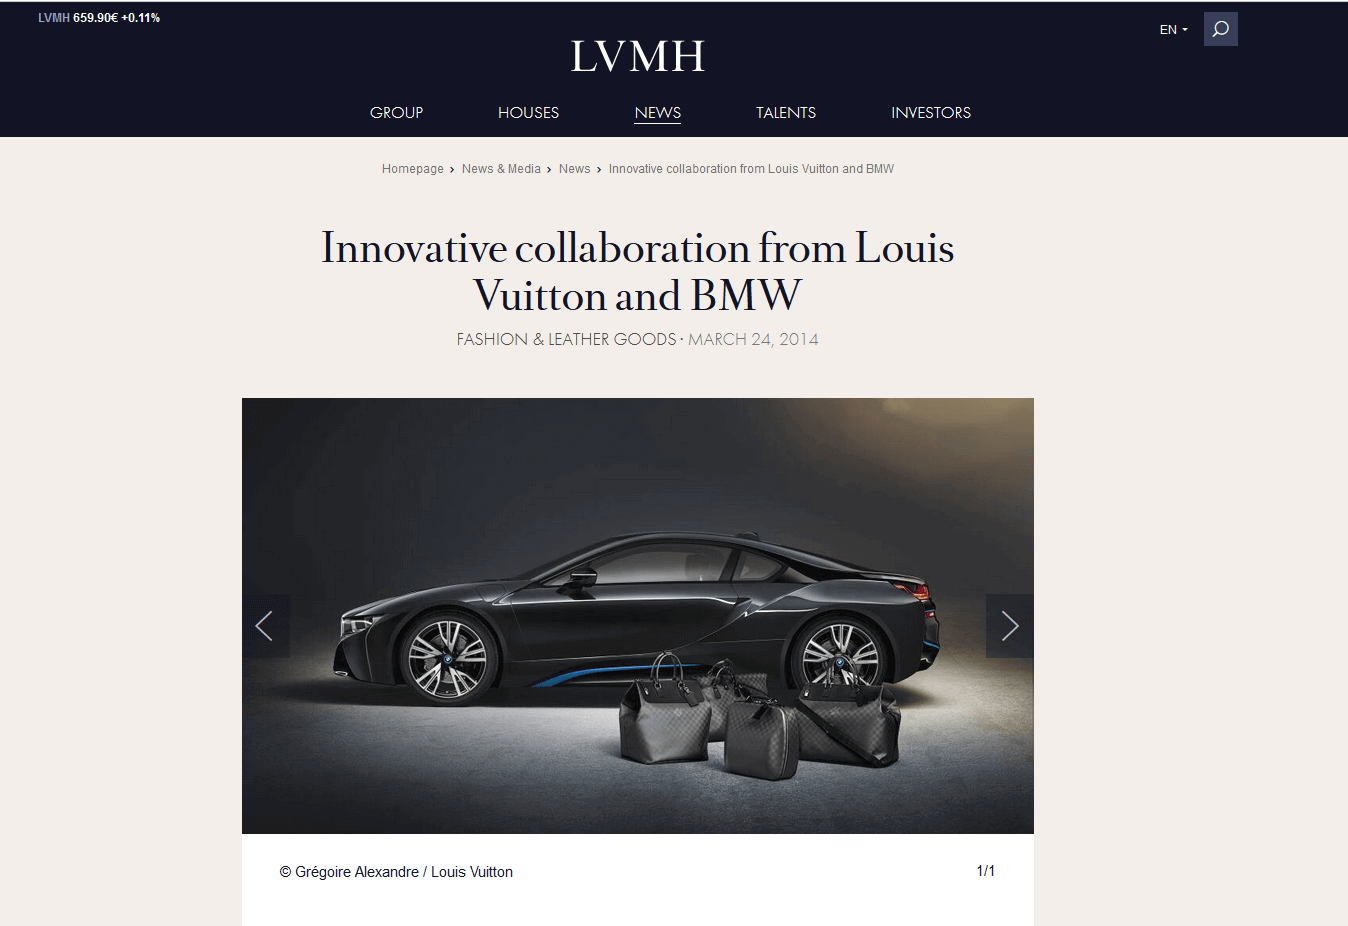 Example of cross-industry co-branding: BMW and Louis Vuitton